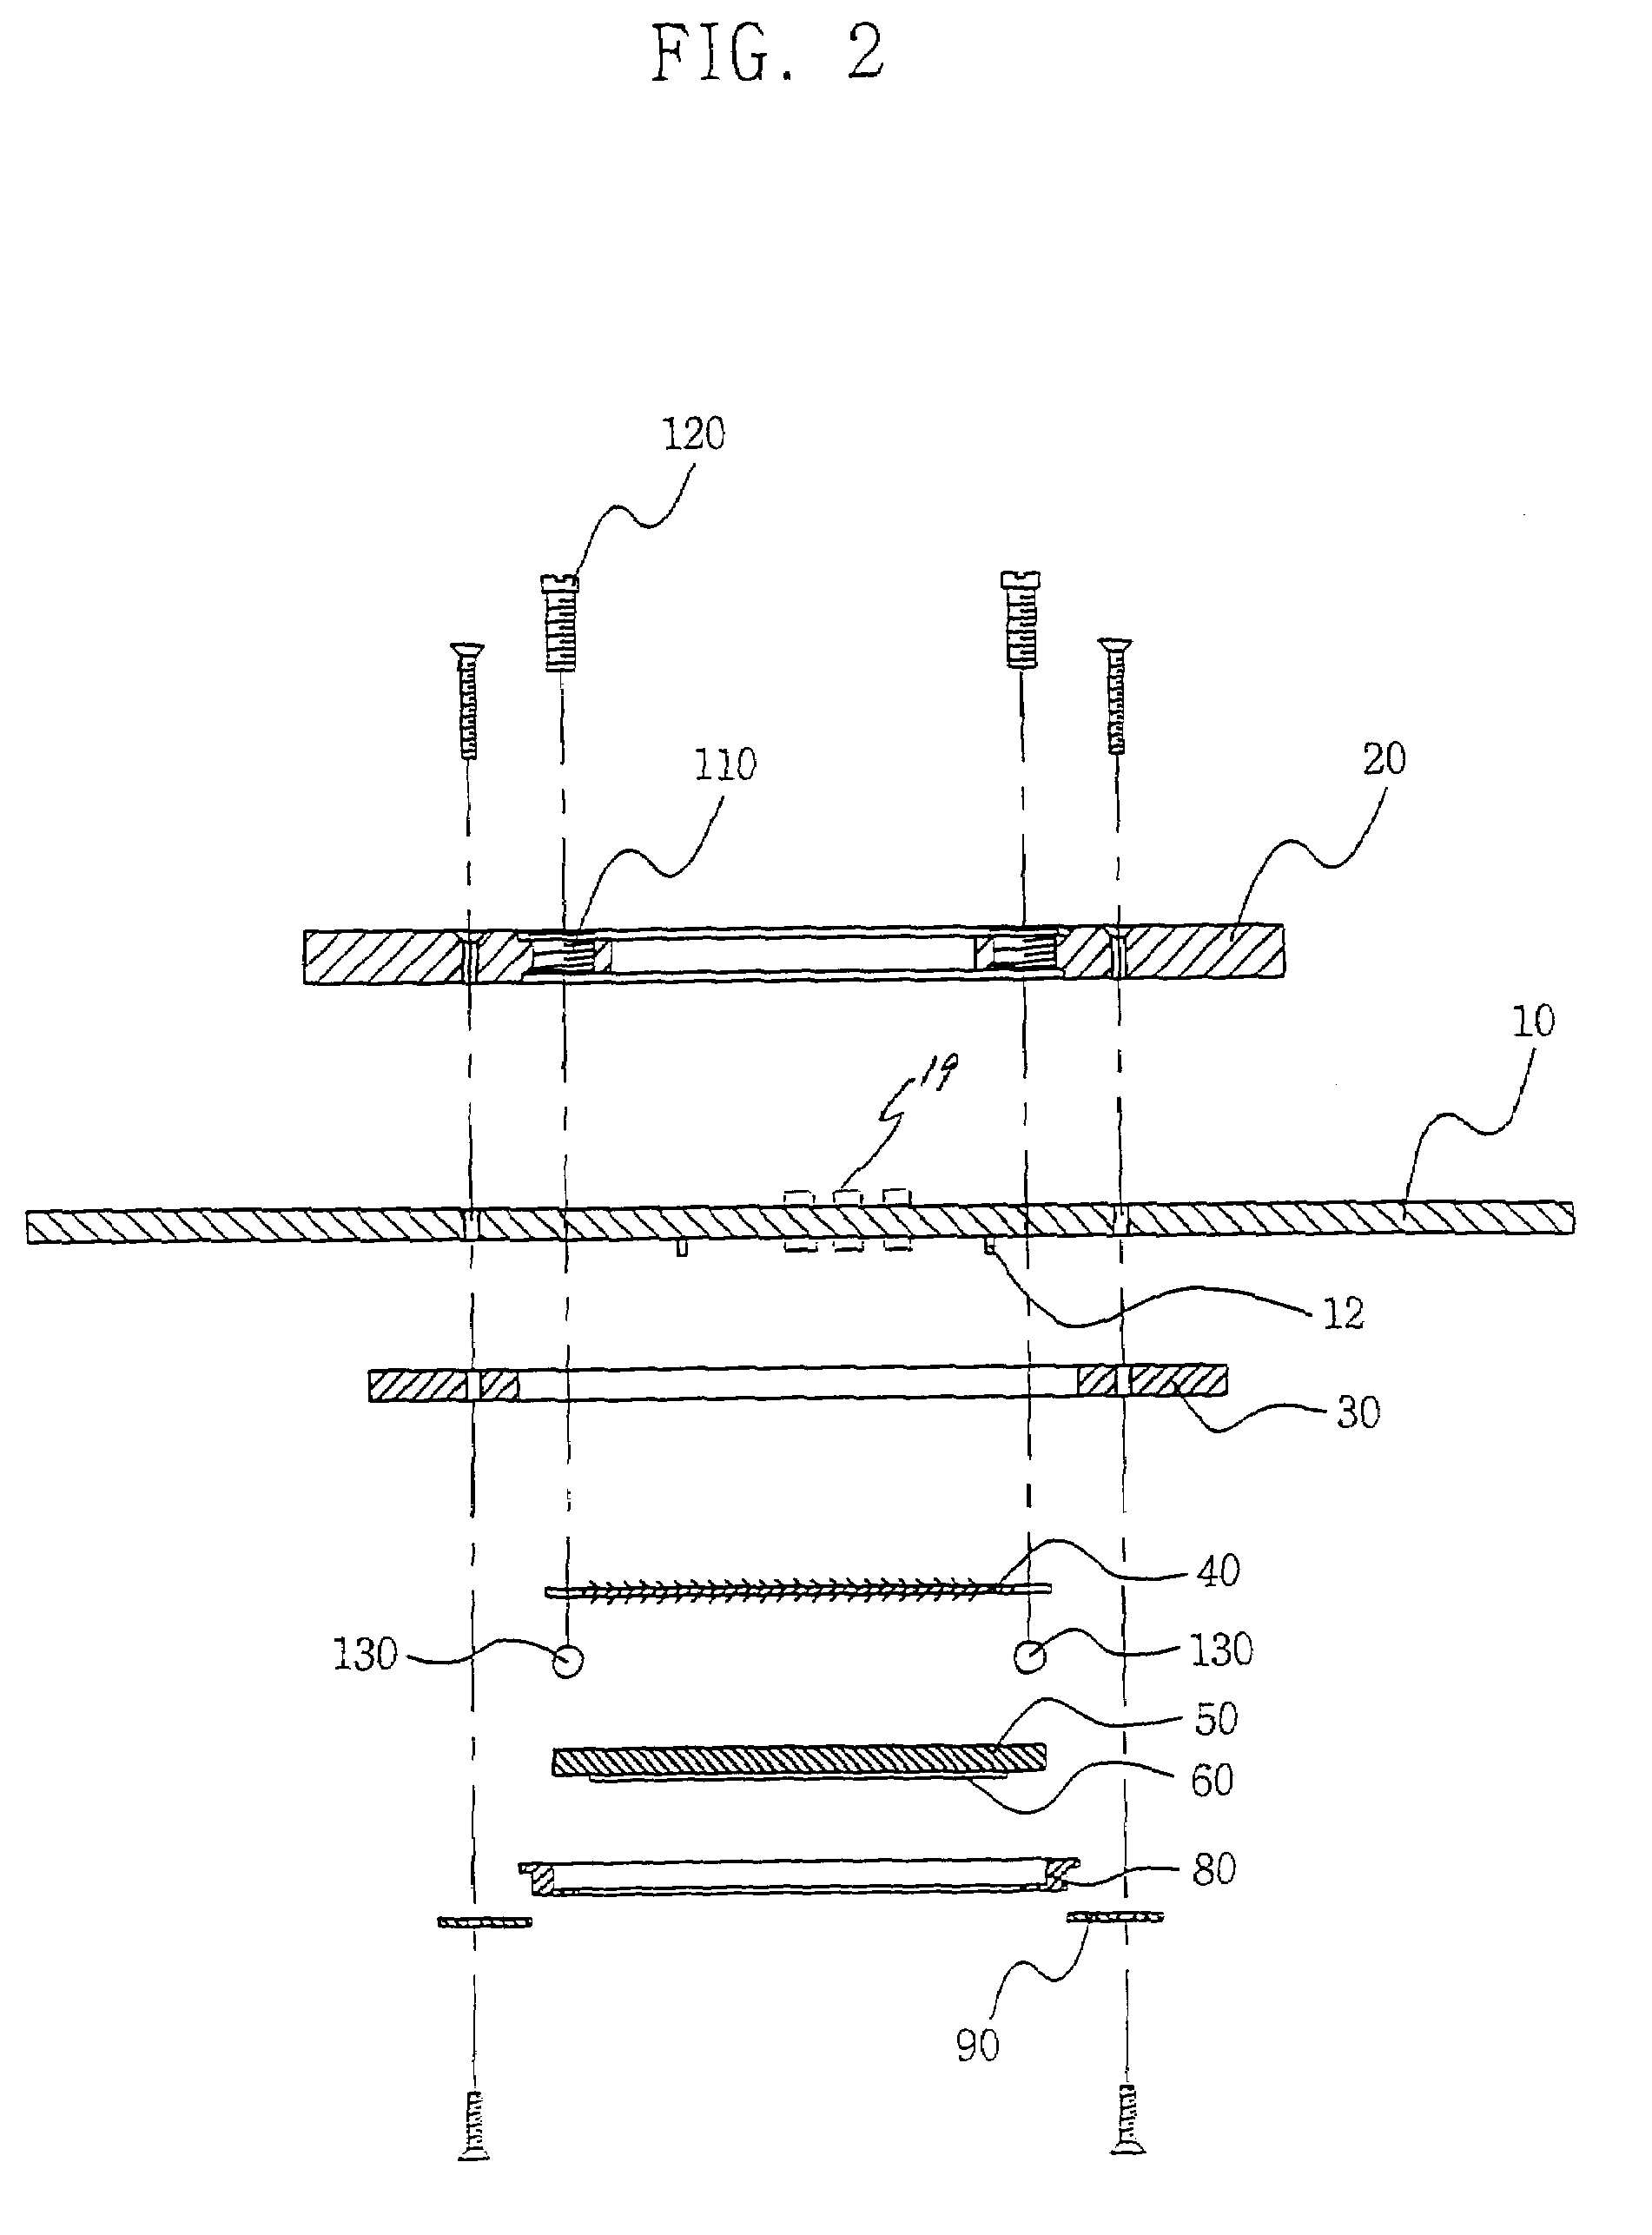 Probe card for testing semiconductor device